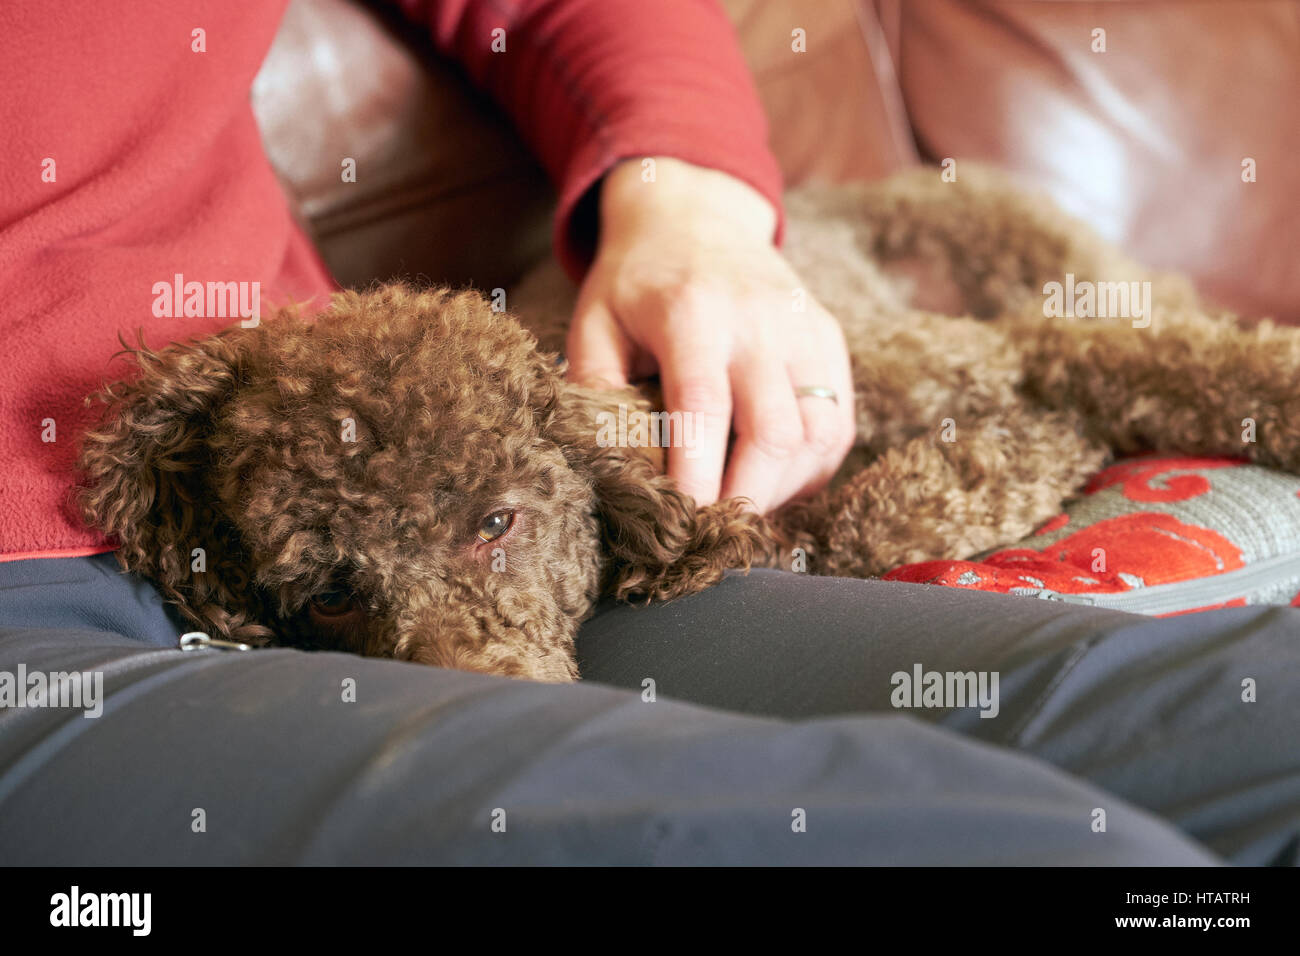 A dog lying peacefully on their owners lap. Stock Photo